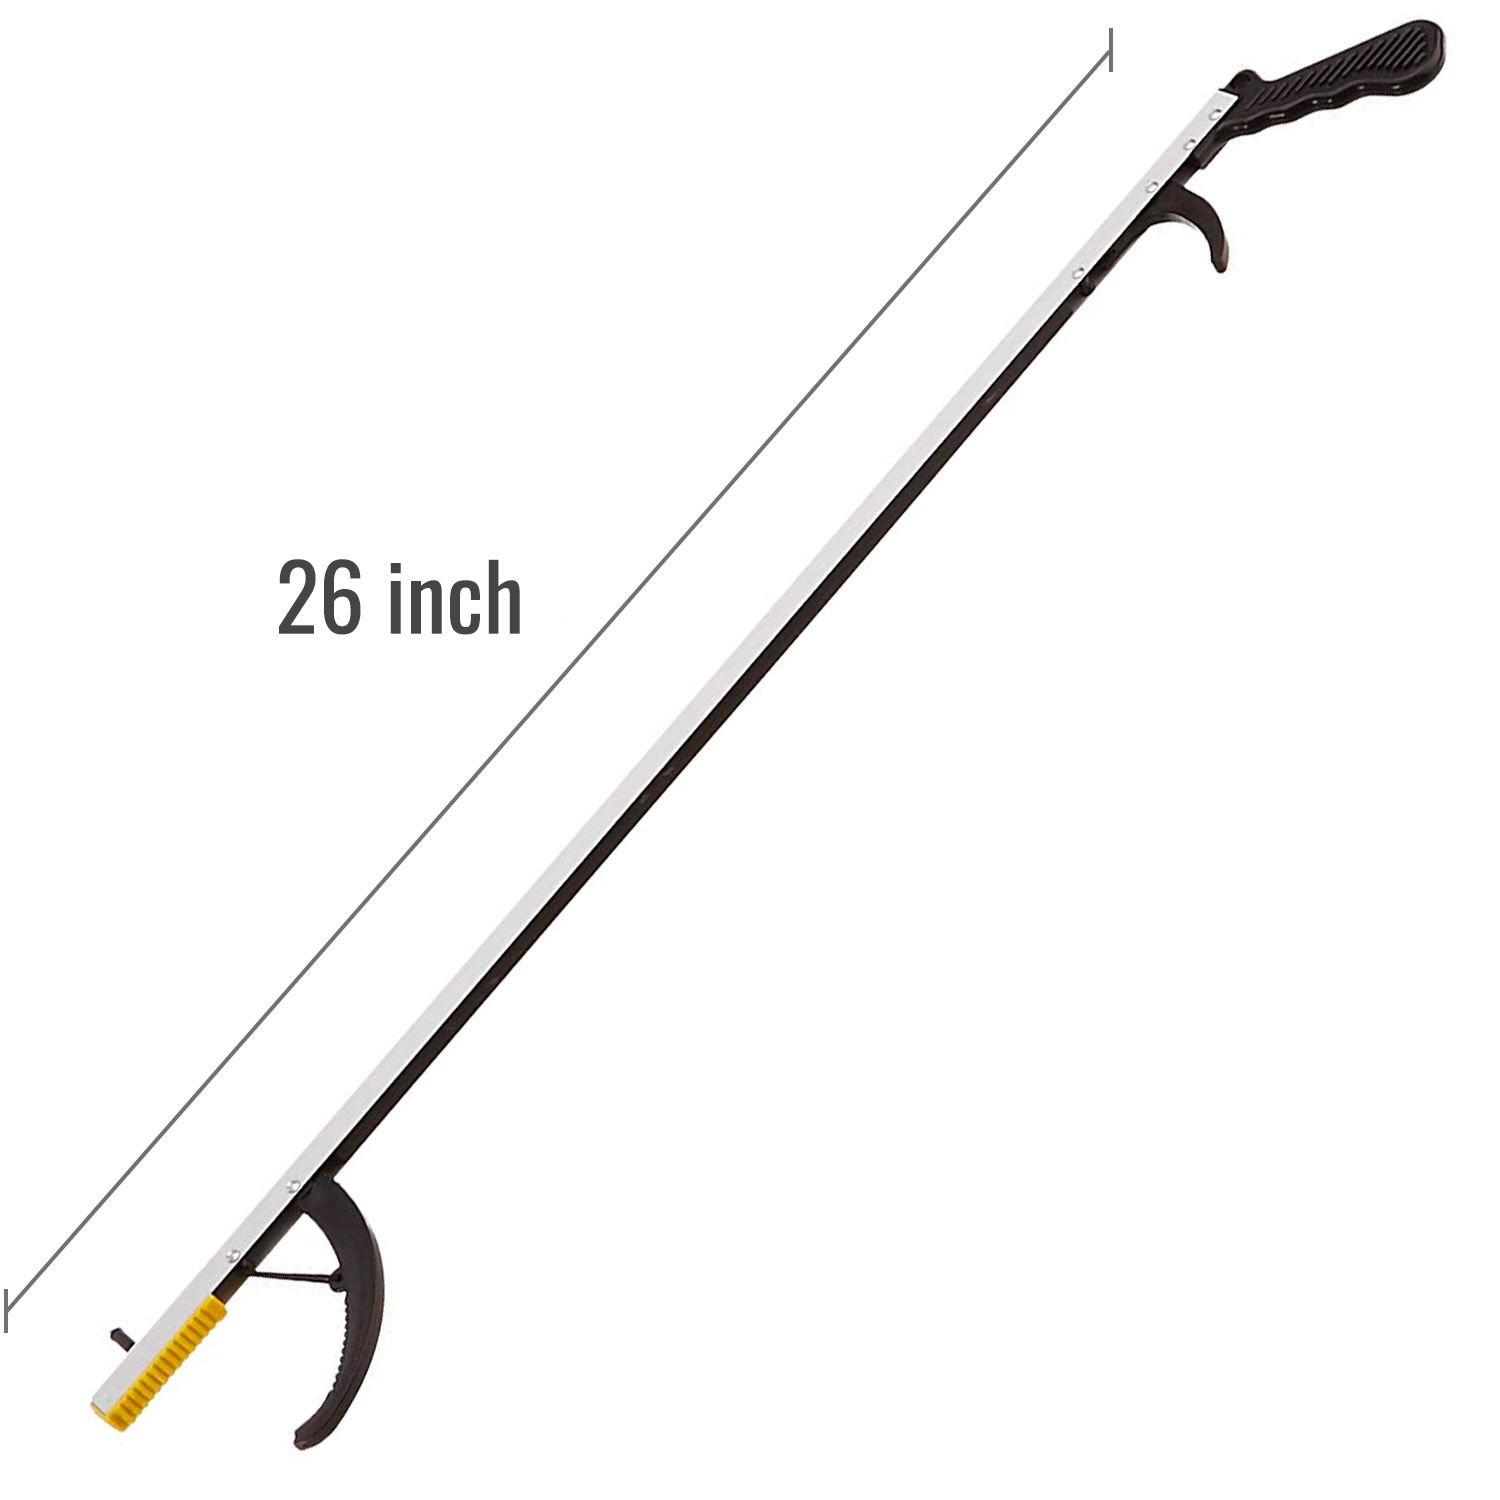 DMI Reacher Grabber Tool for Elderly, Disabled or After Surgery Recovery, Claw Grabber, Reaching Assist Tool, Trash Picker, Hand Gripper, Arm Extension, 26 Inches, Non Folding, Magnetic Claw - image 2 of 6